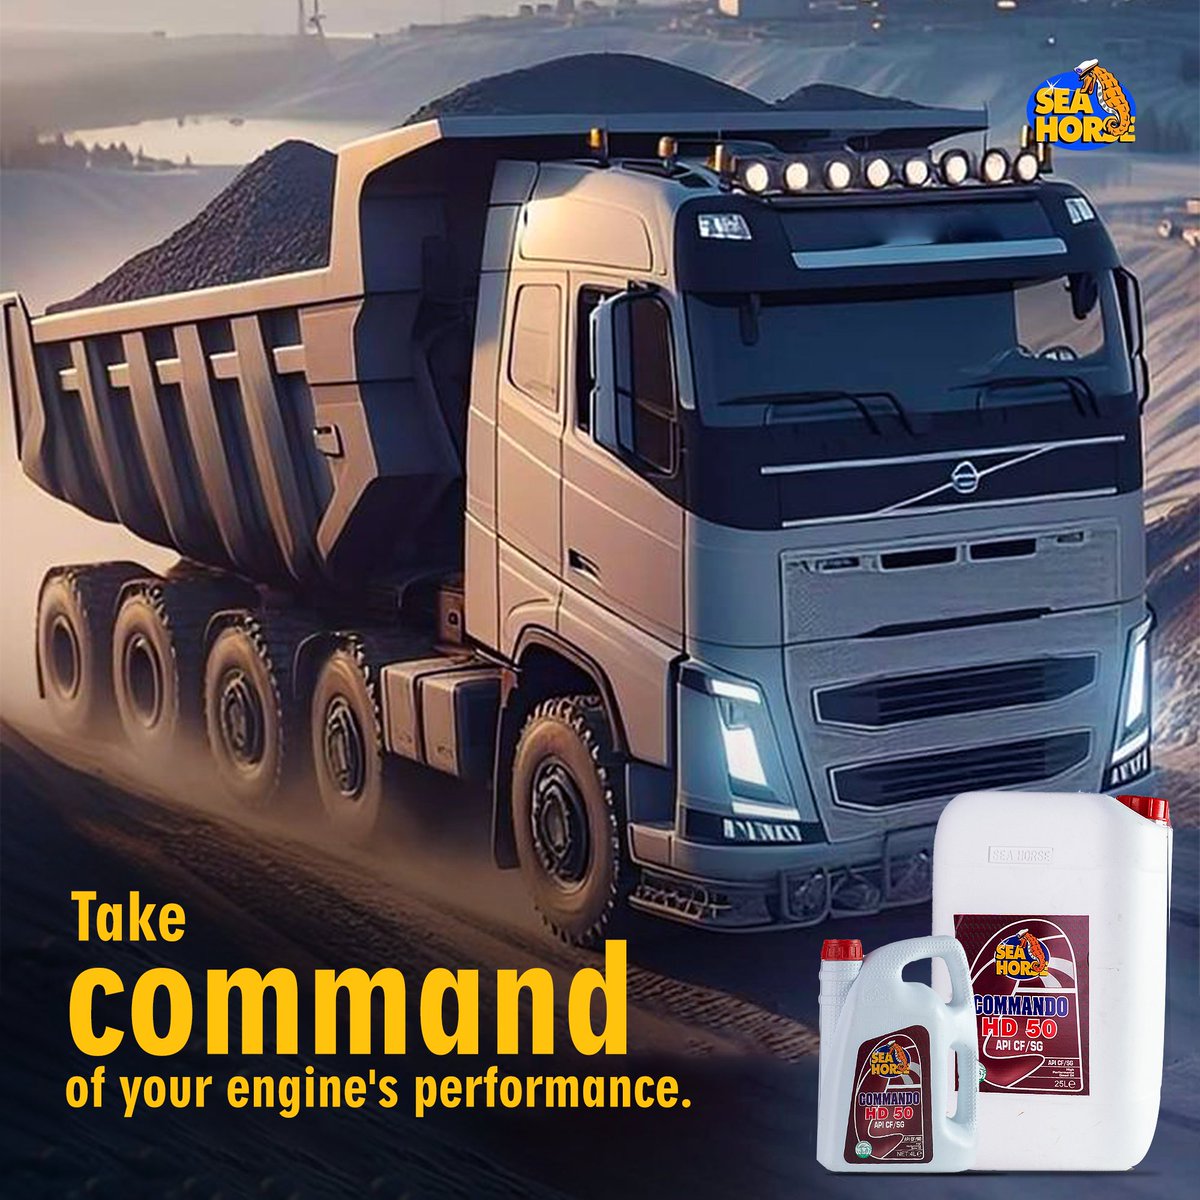 Some engines demand more. They crave the heavy-duty protection and relentless performance of Sea Horse COMMANDO HD 50. 

This premium engine oil is formulated to handle the toughest jobs, mile after gruelling mile. 

#EngineOil #QualityOil #SeaHorseLubricants #ThePowerOfYourDrive